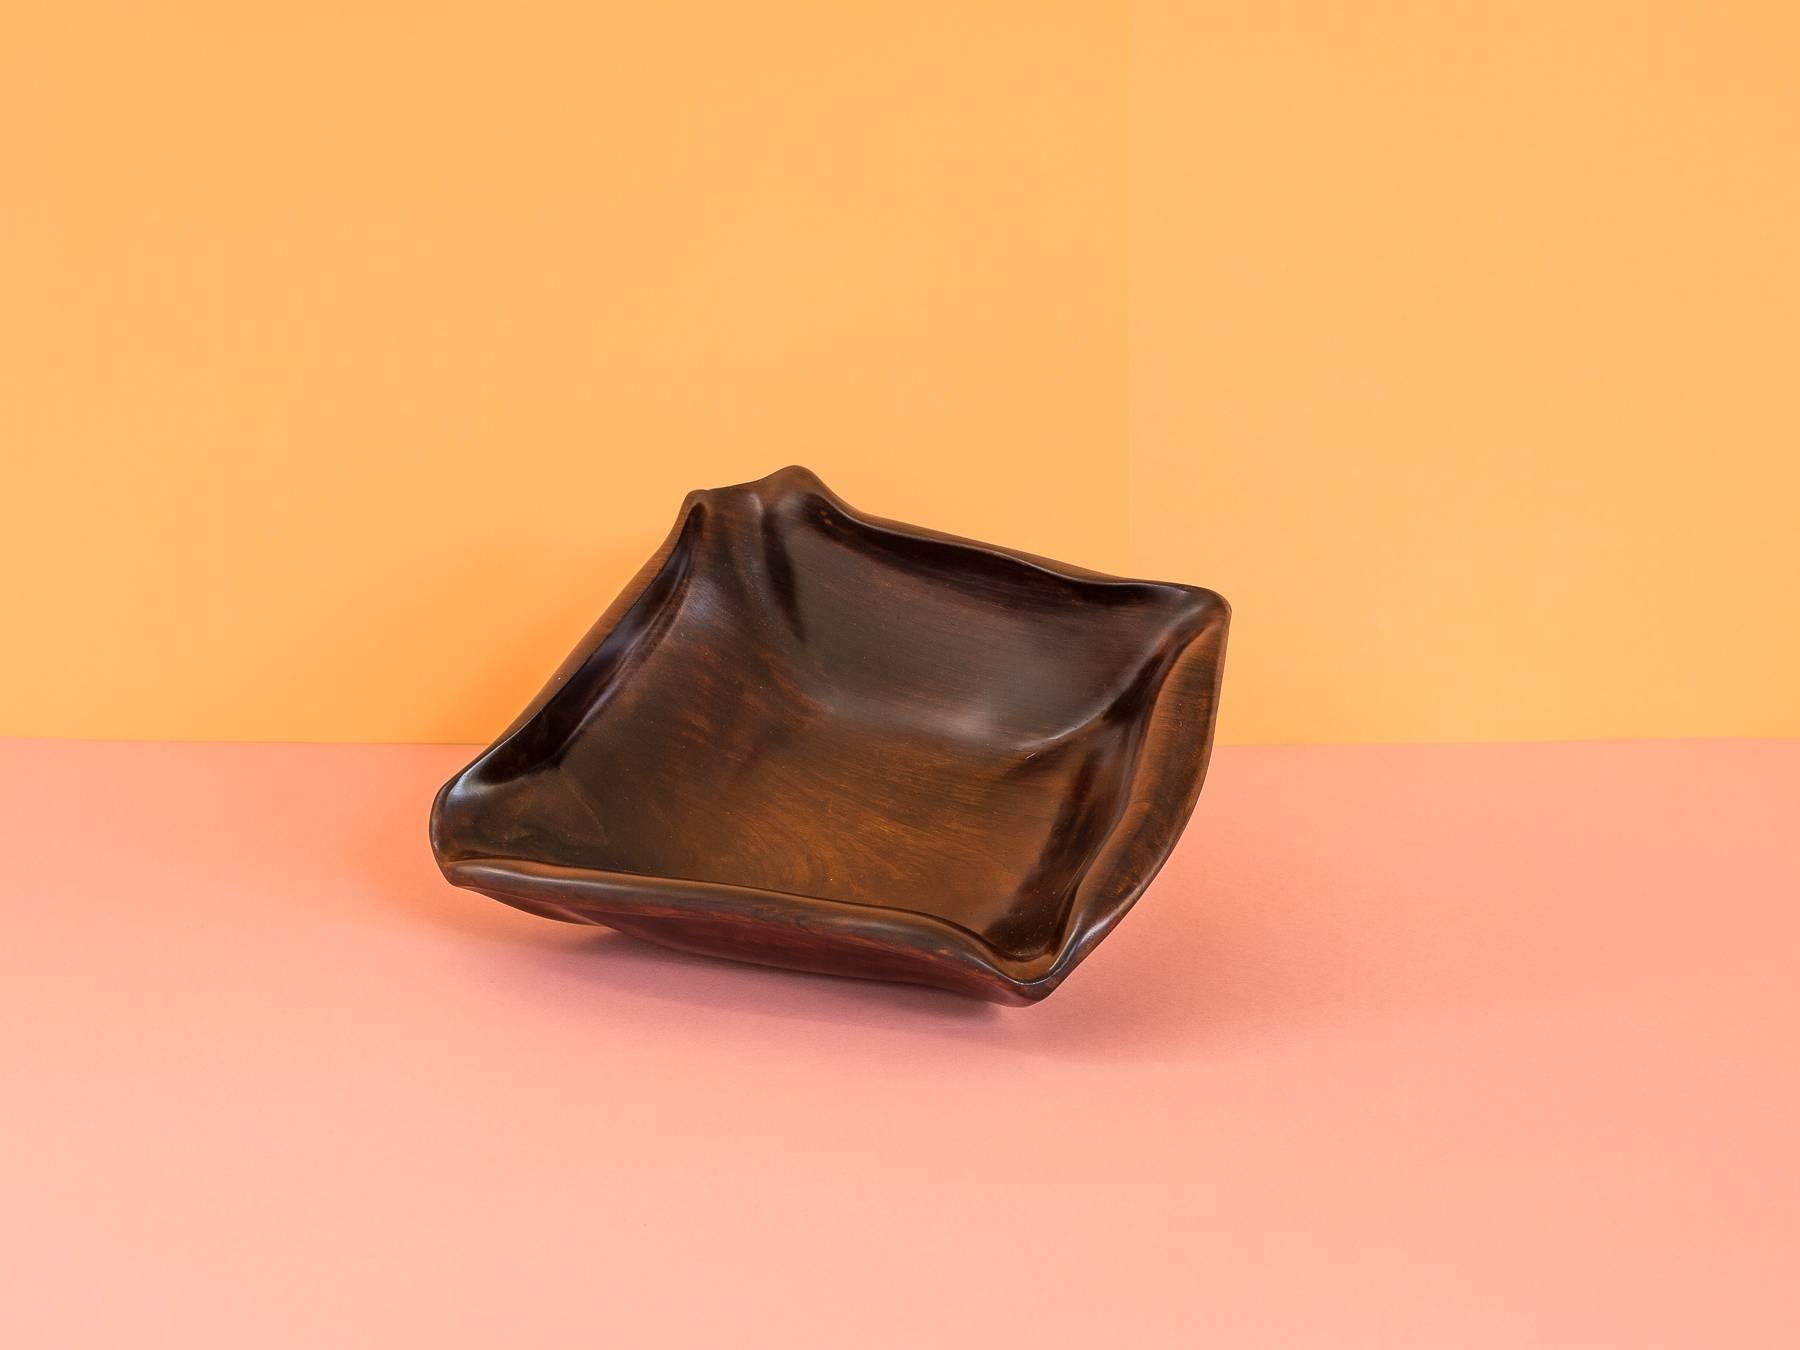 This amazing solid rosewood bowl was designed by Romanian born Jean Gillon, for his company Wood Art in the late 1960s. The piece has been restored and refinished.